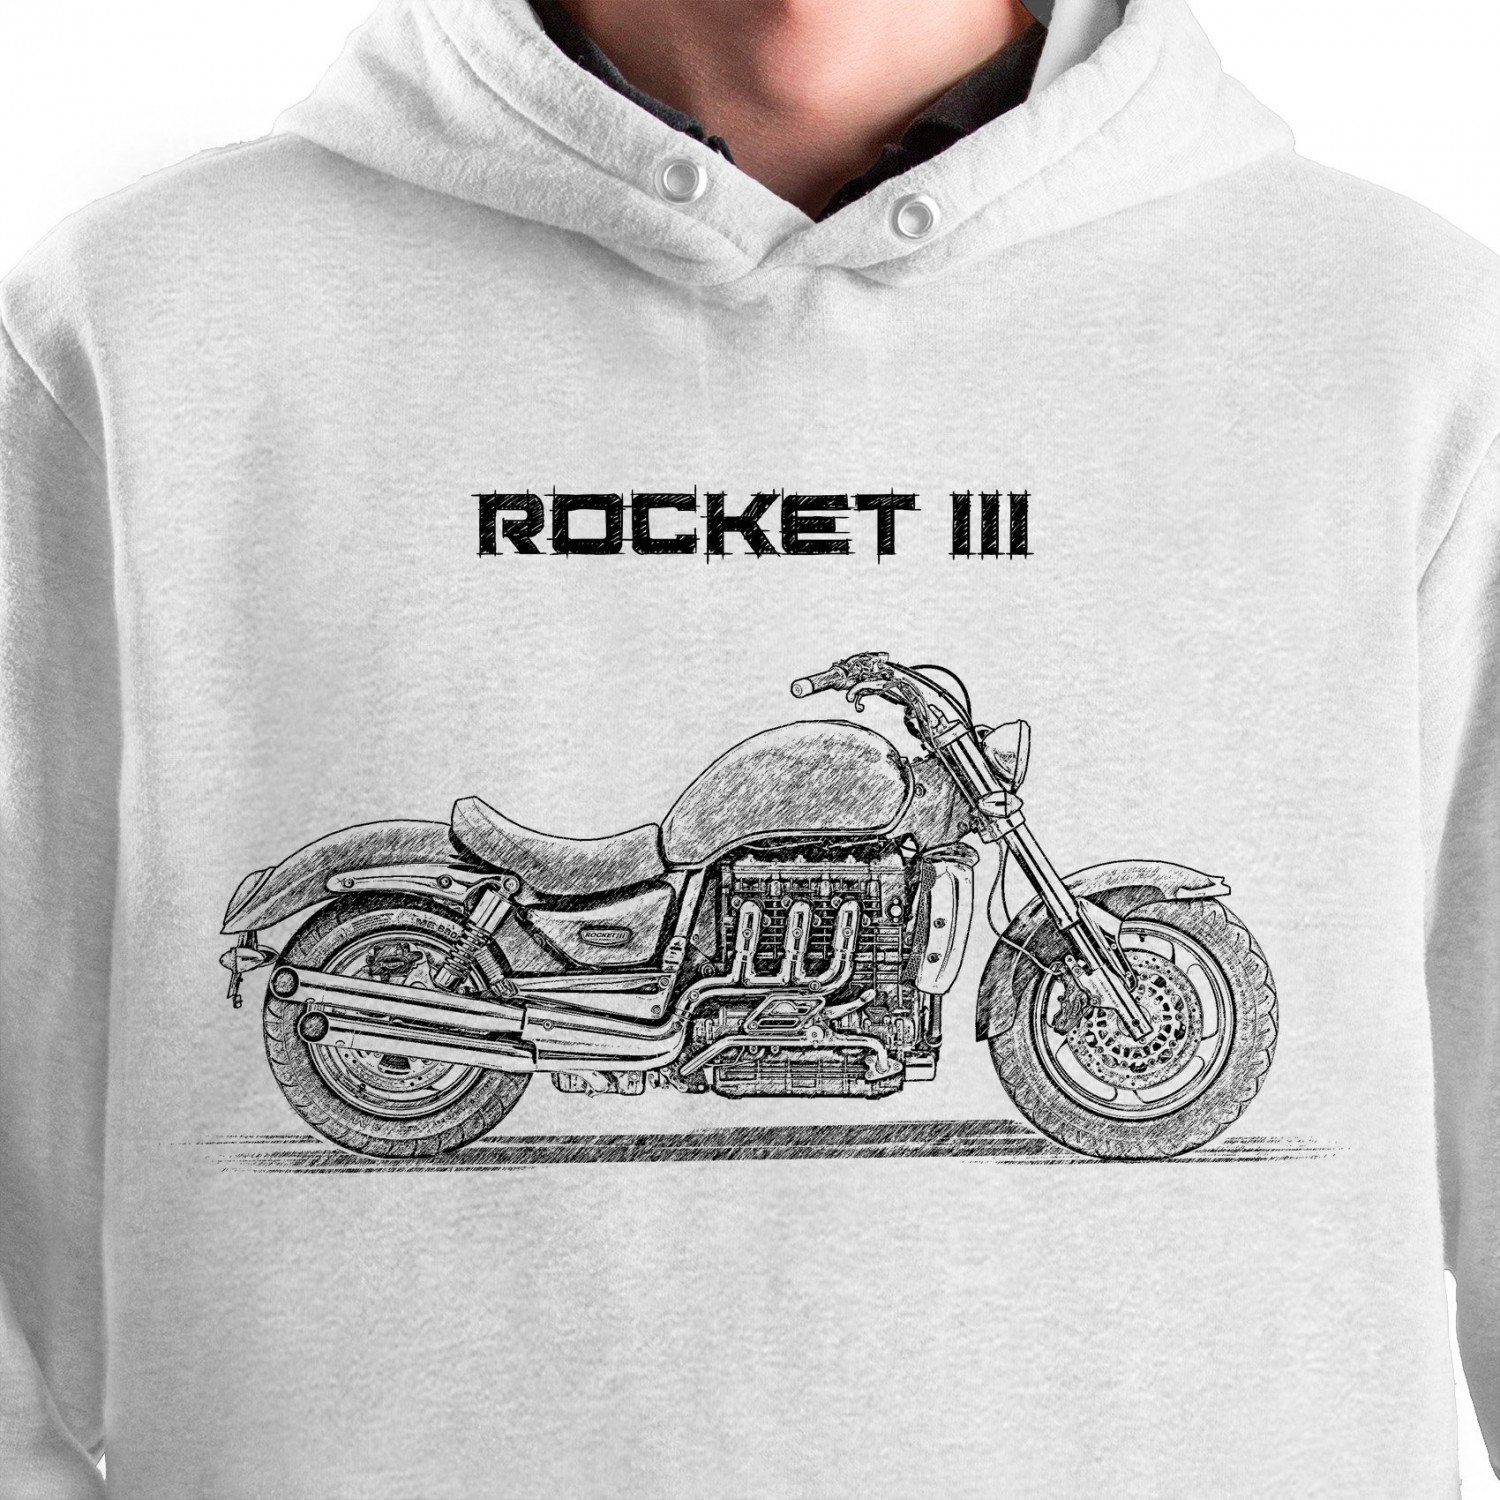 White T-shirt with Triumph Rocket III. Gift for motorcyclist.